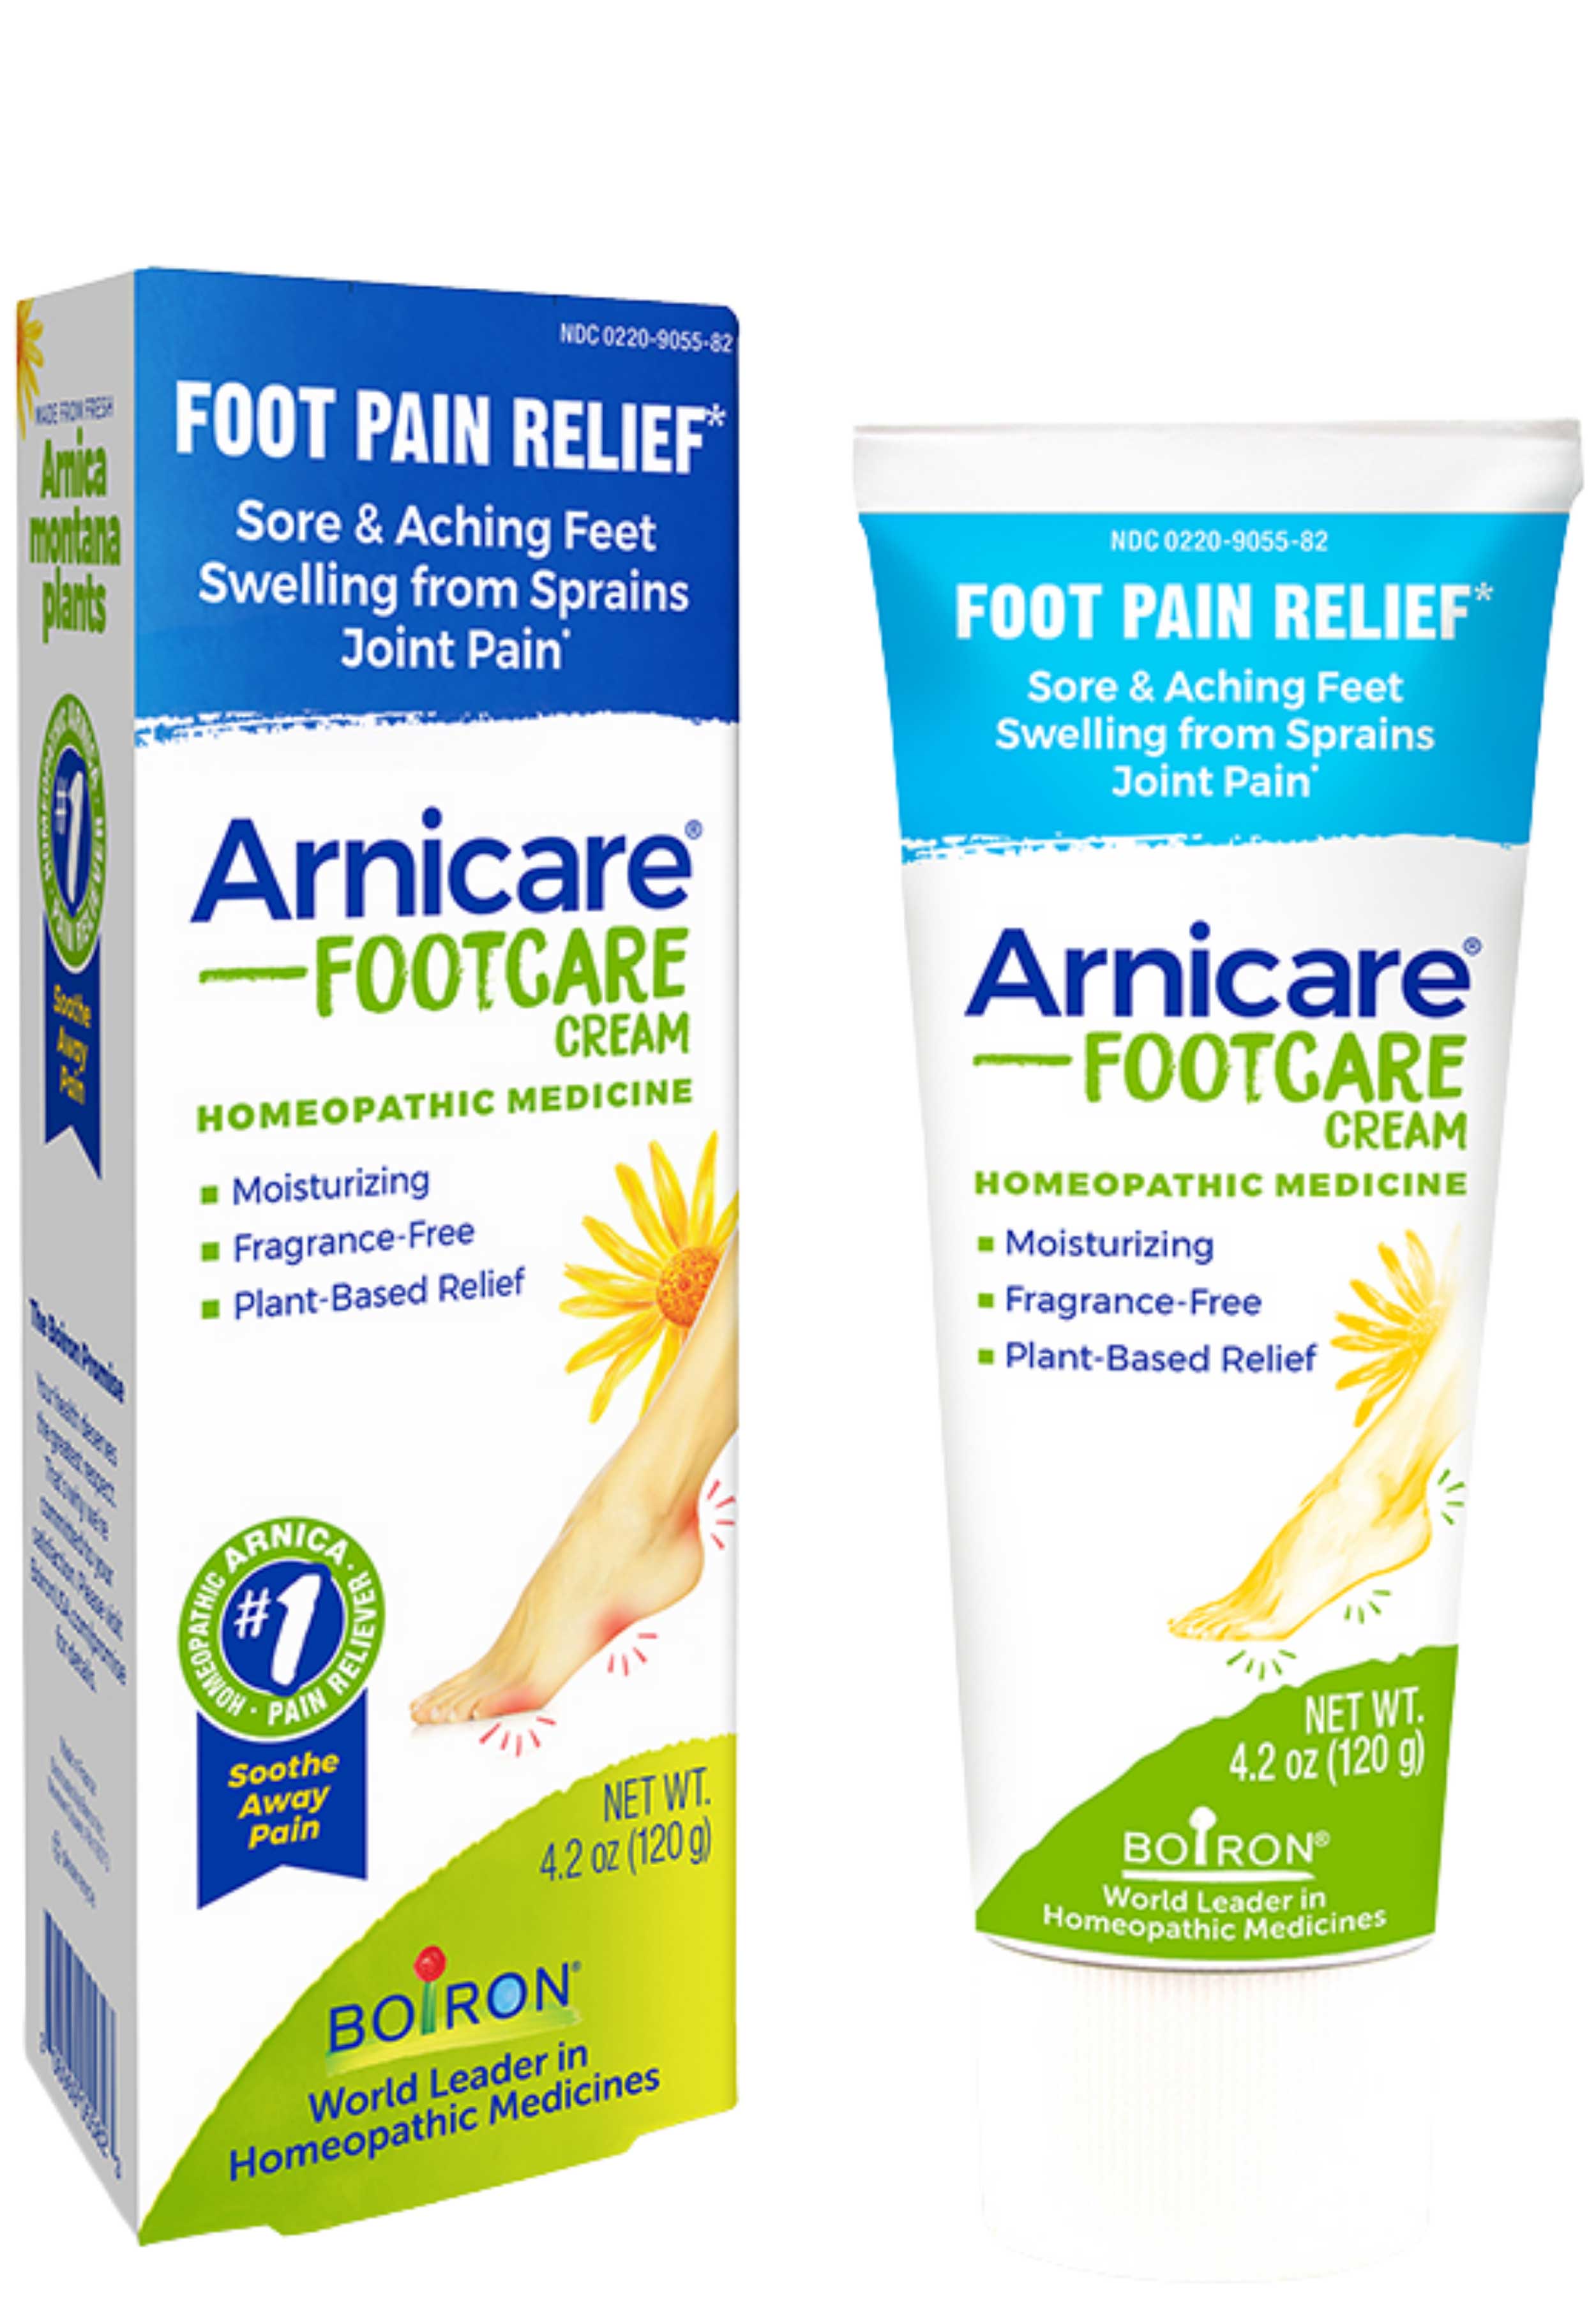 Boiron Homeopathics Arnicare Foot Care